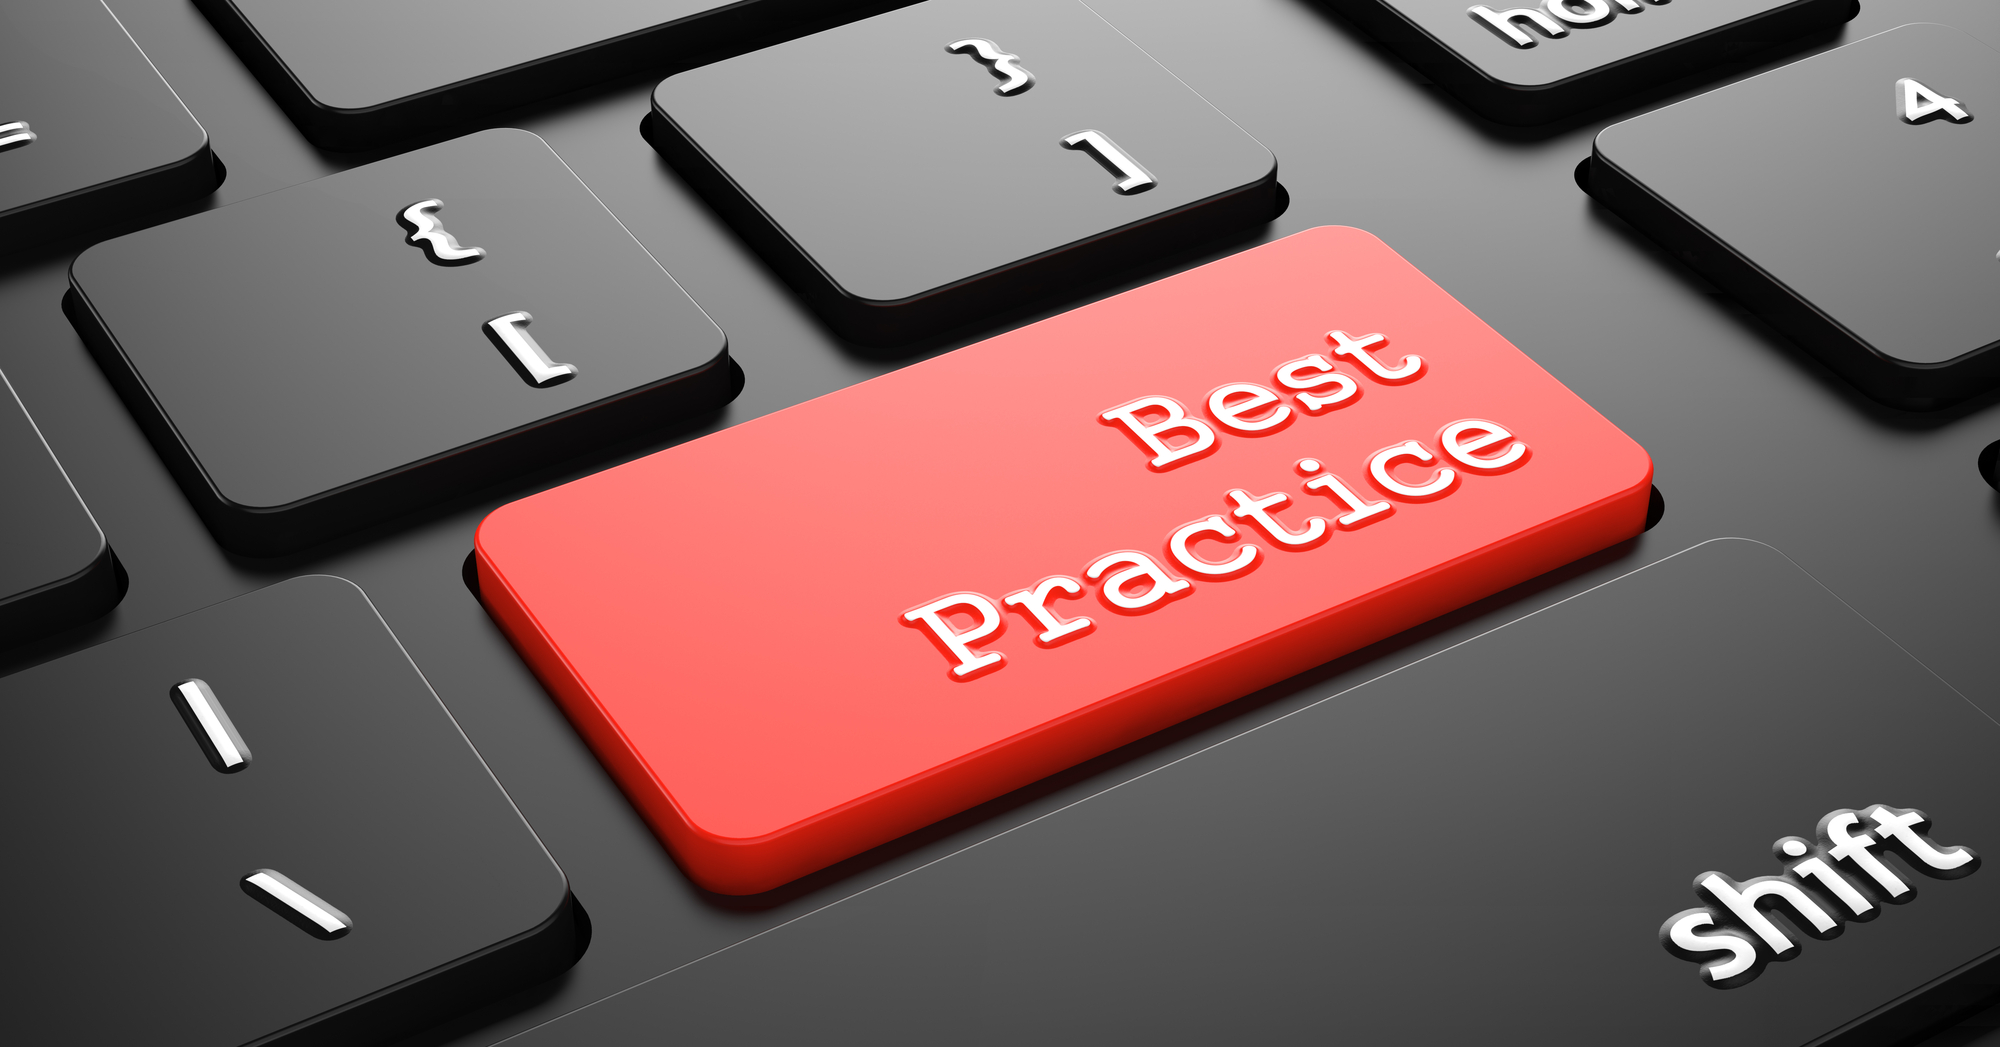 Do you have to keep changing cybersecurity best practices?